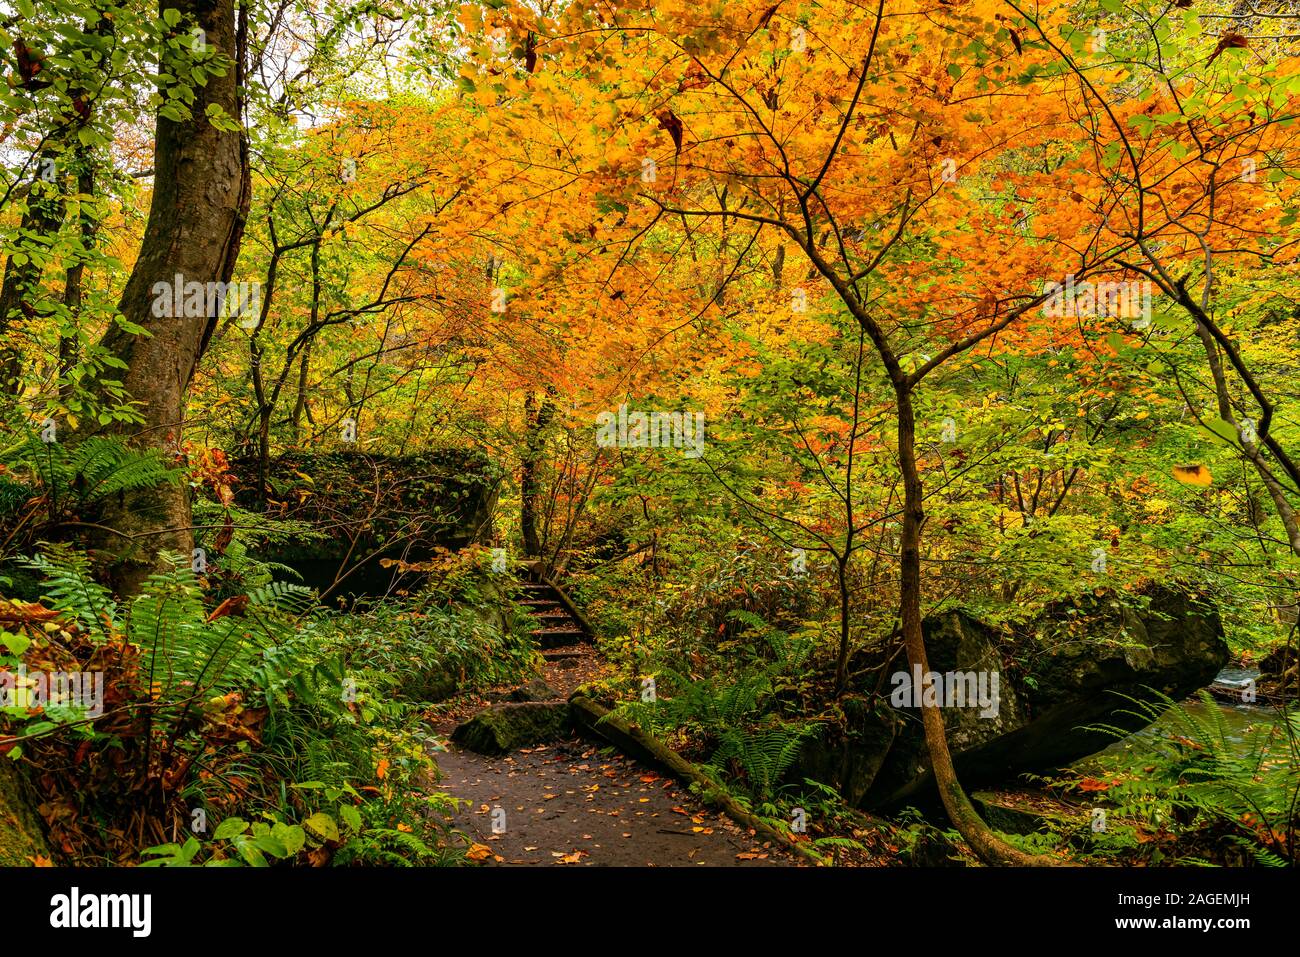 View of Oirase Stream Walking Trail in the colorful foliage of autumn season forest at Oirase Valley in Towada Hachimantai National Park, Aomori Prefe Stock Photo